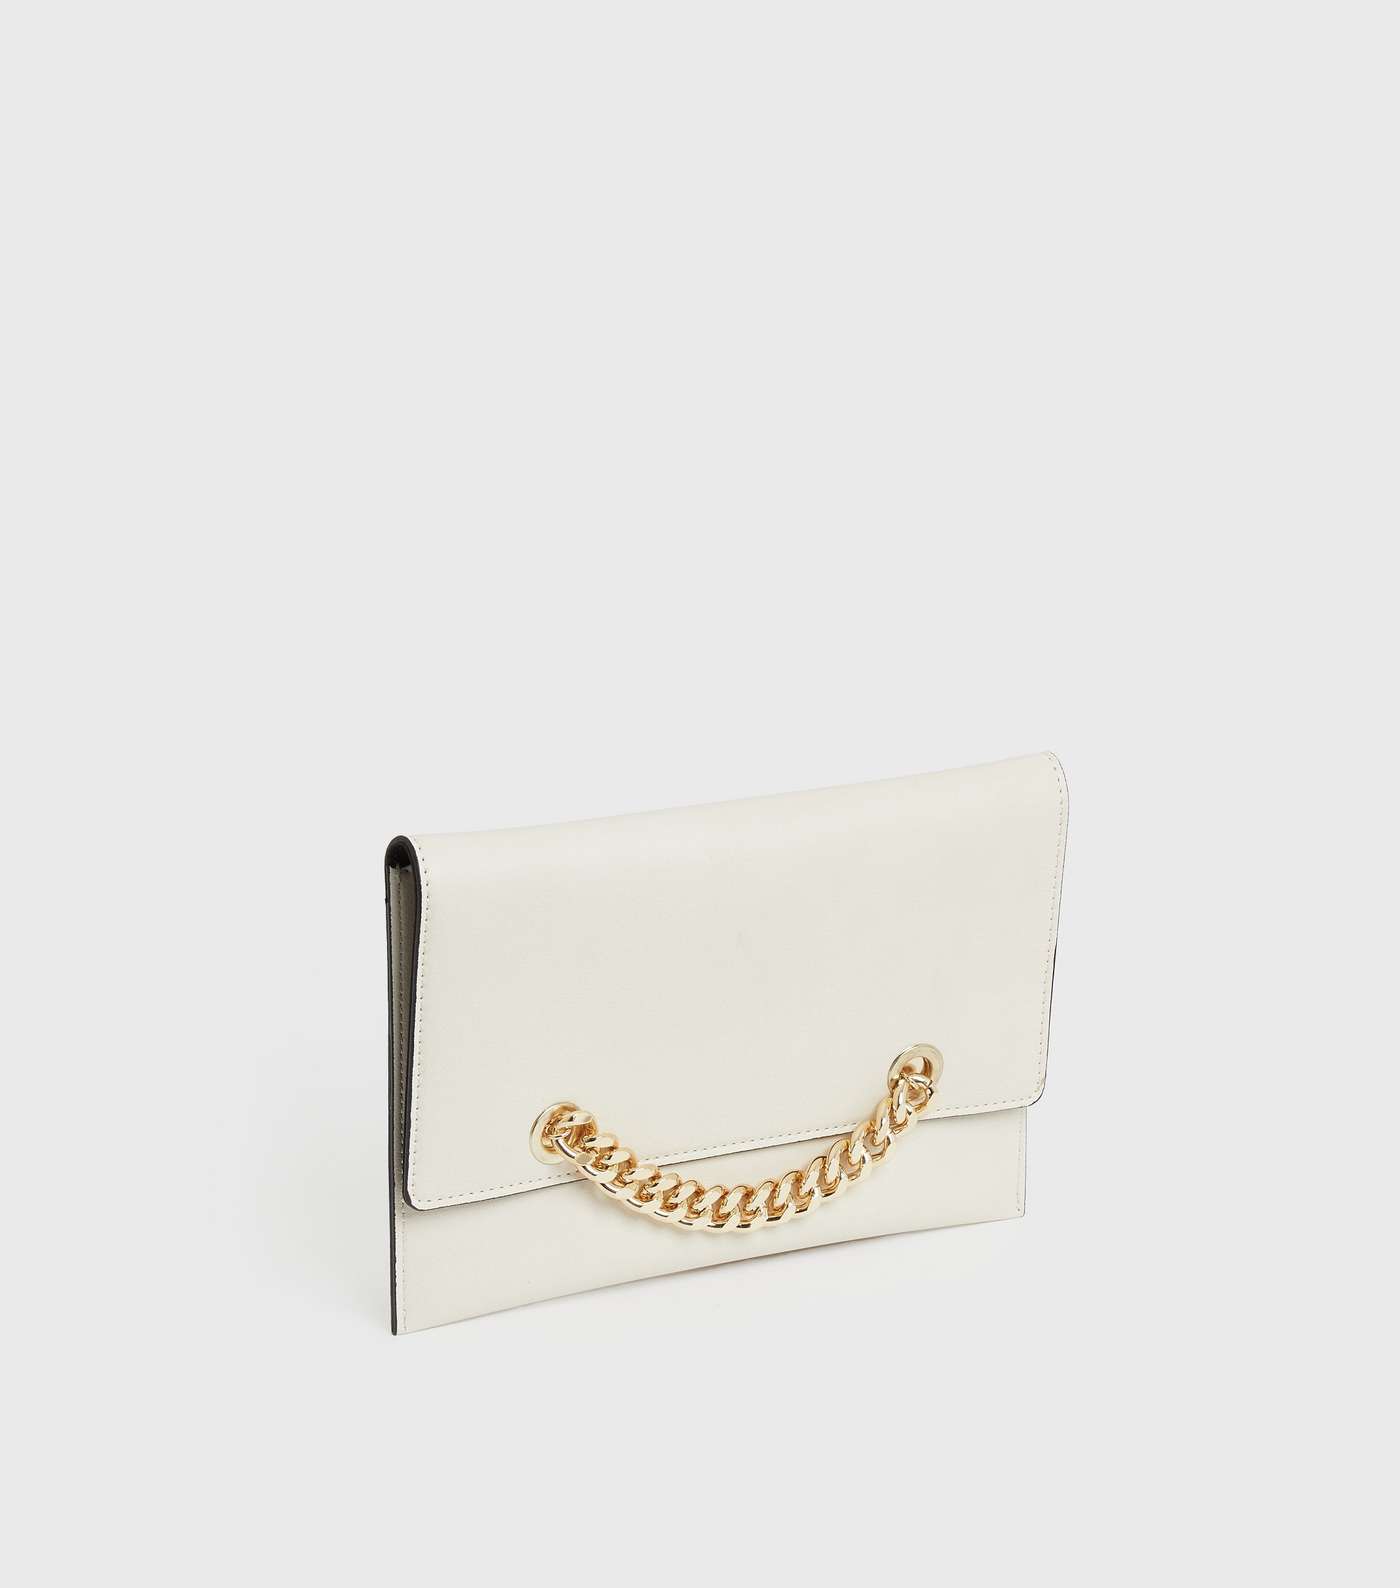 Cream Leather-Look Chain Clutch Bag Image 3